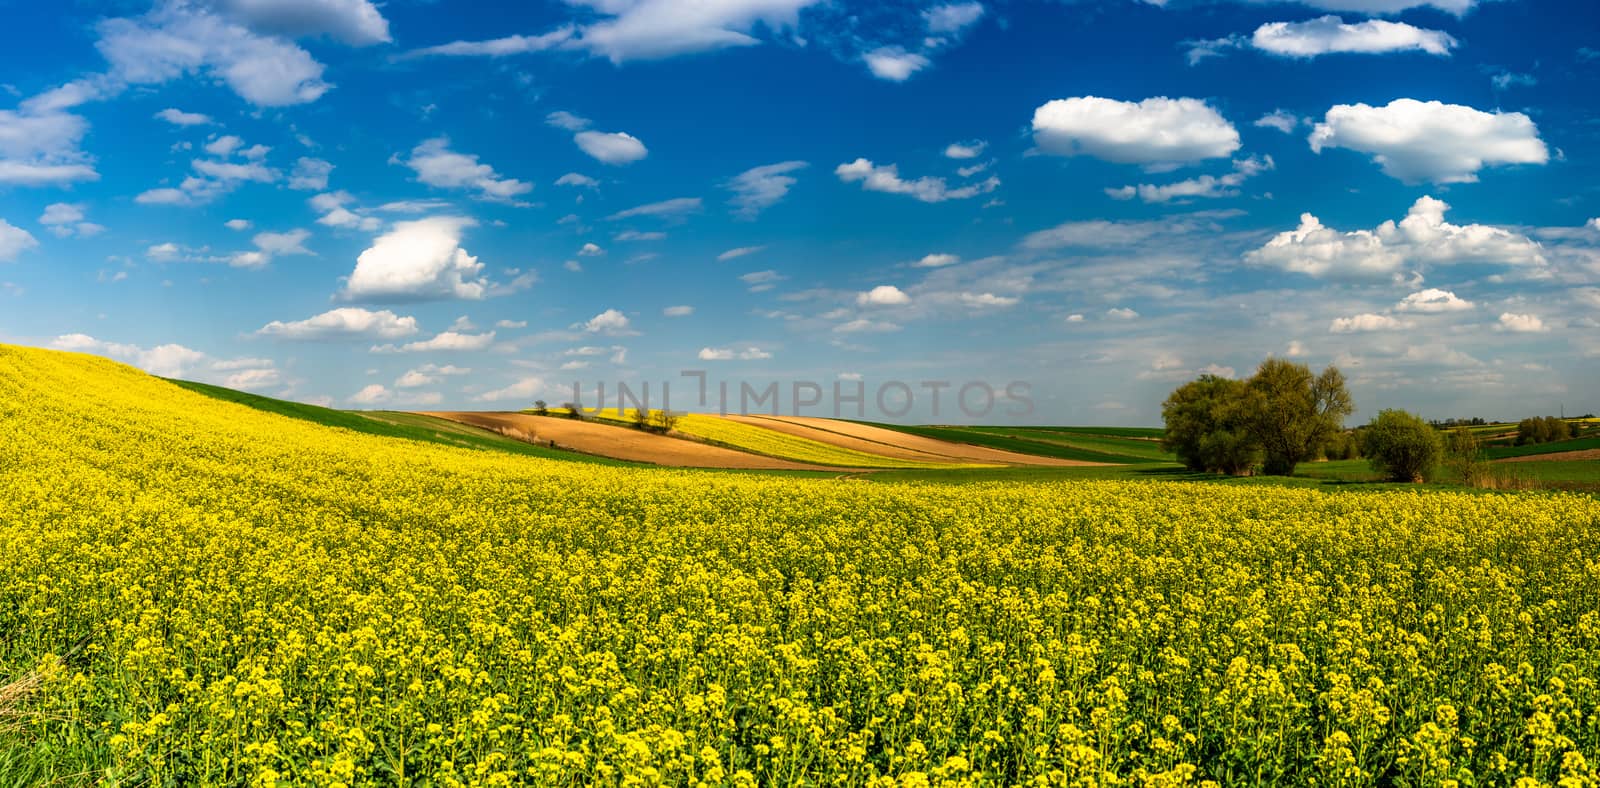 Panoramic Image or Picturesque Countryside. Canola or Rape Fields, Trees and Blue Sky with Clouds.